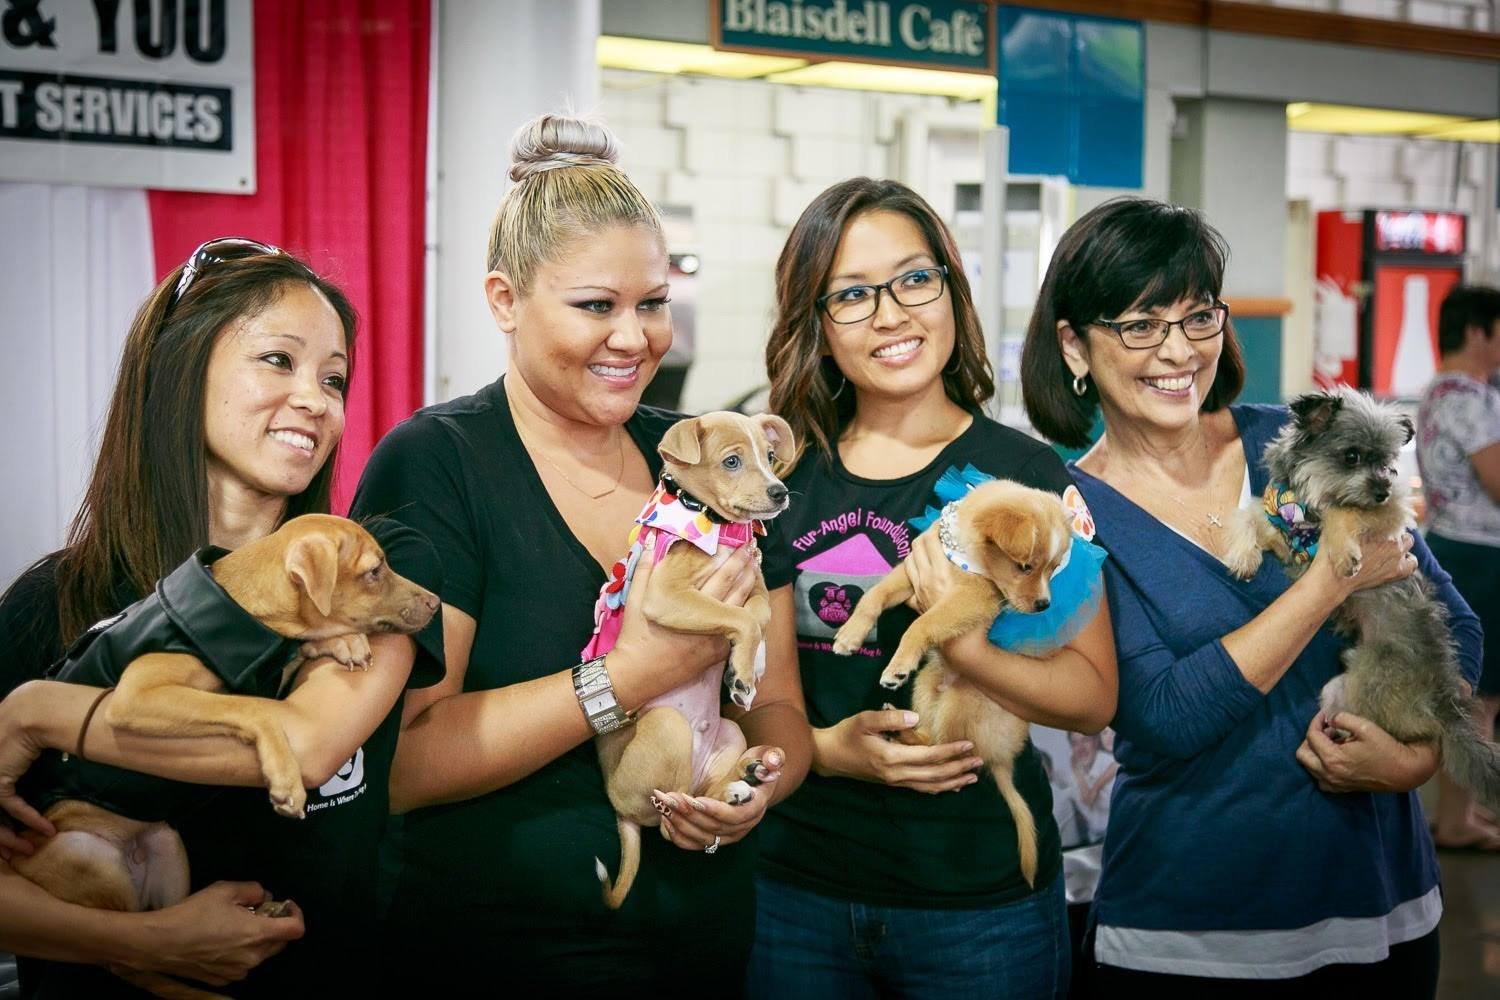 Celebrities and Their Pets Fashion Show featured at the Hawaii Woman Expo